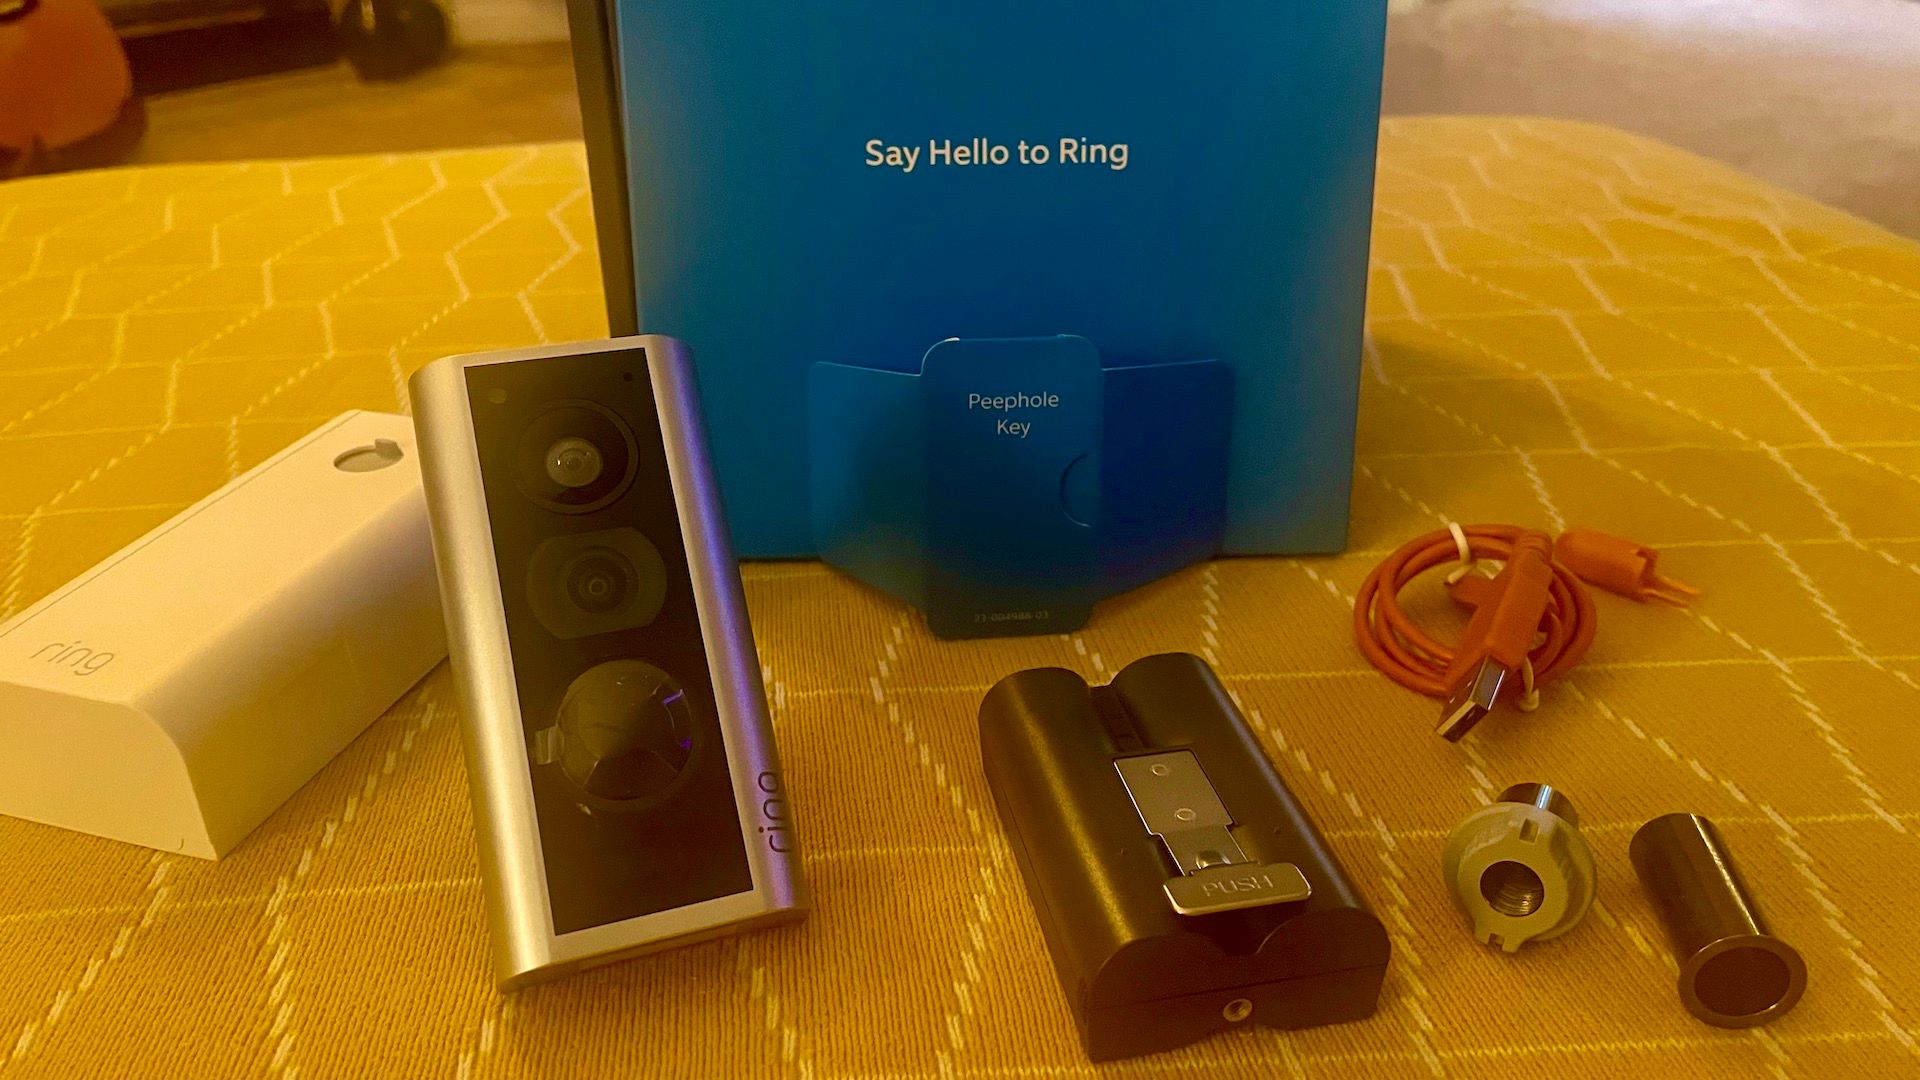 the box contents of the ring peephole cam